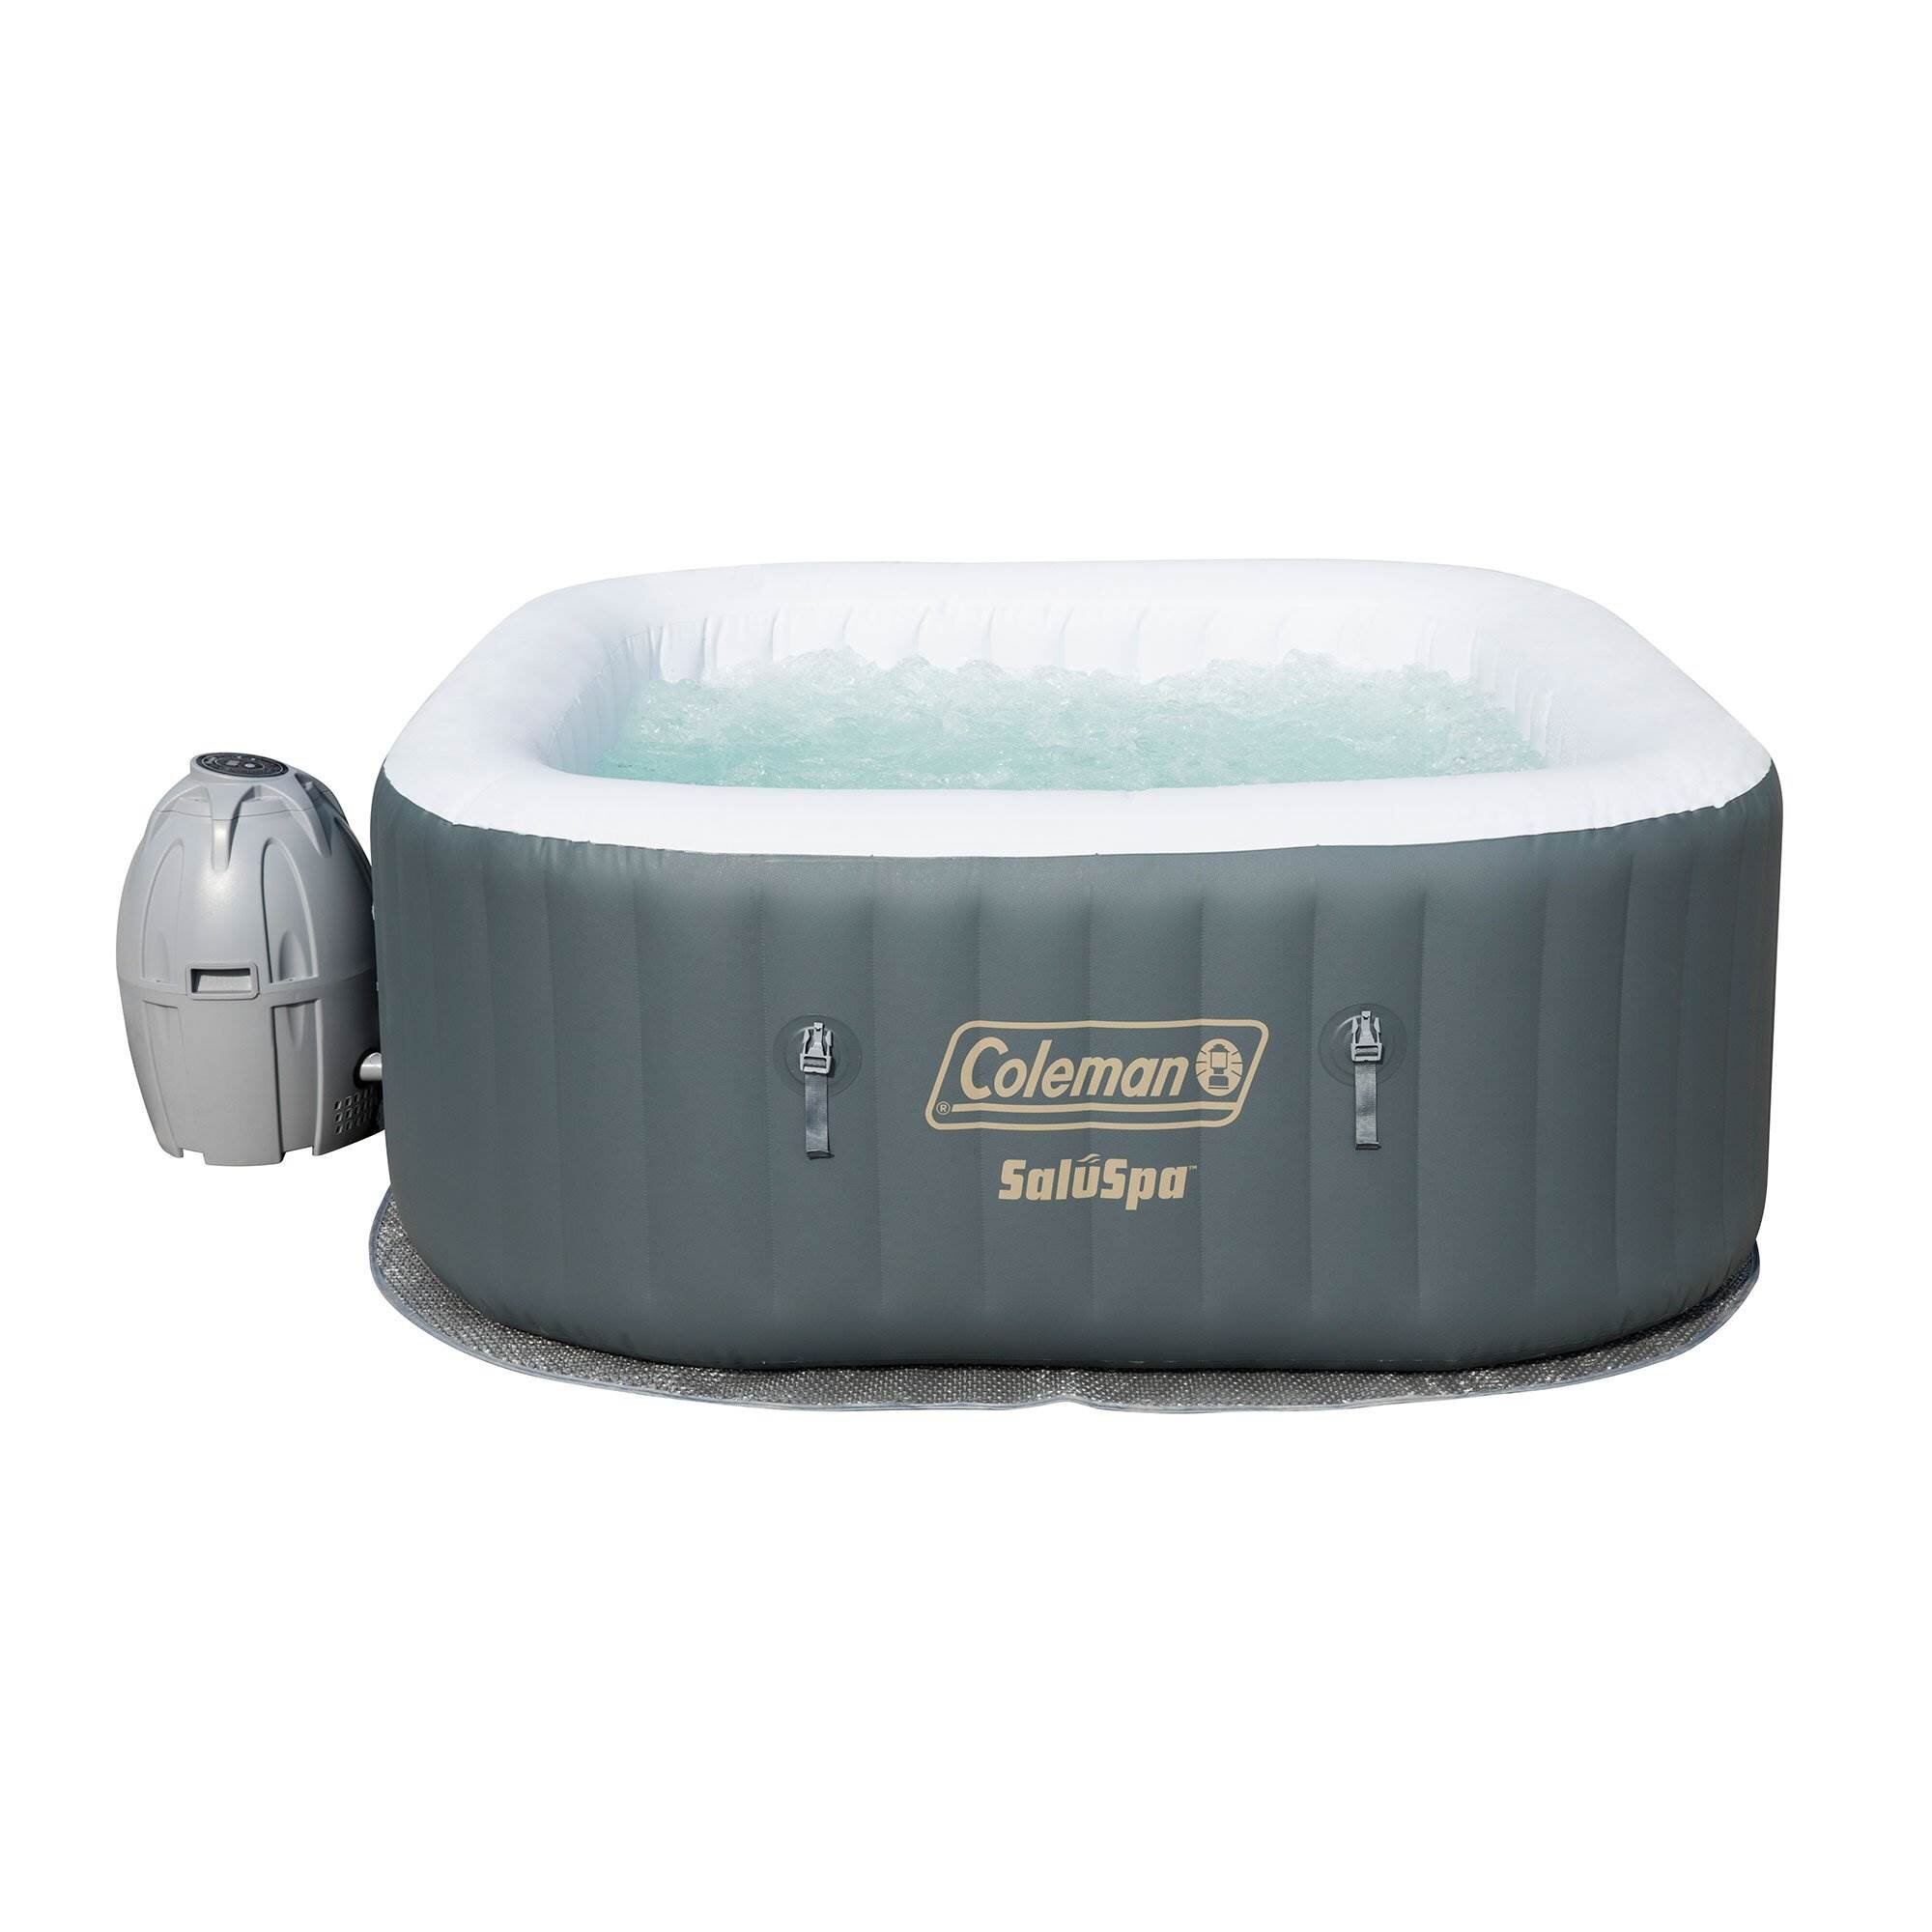 The Coleman SaluSpa Spa is an inflatable hot tub that seats 4 people and is...